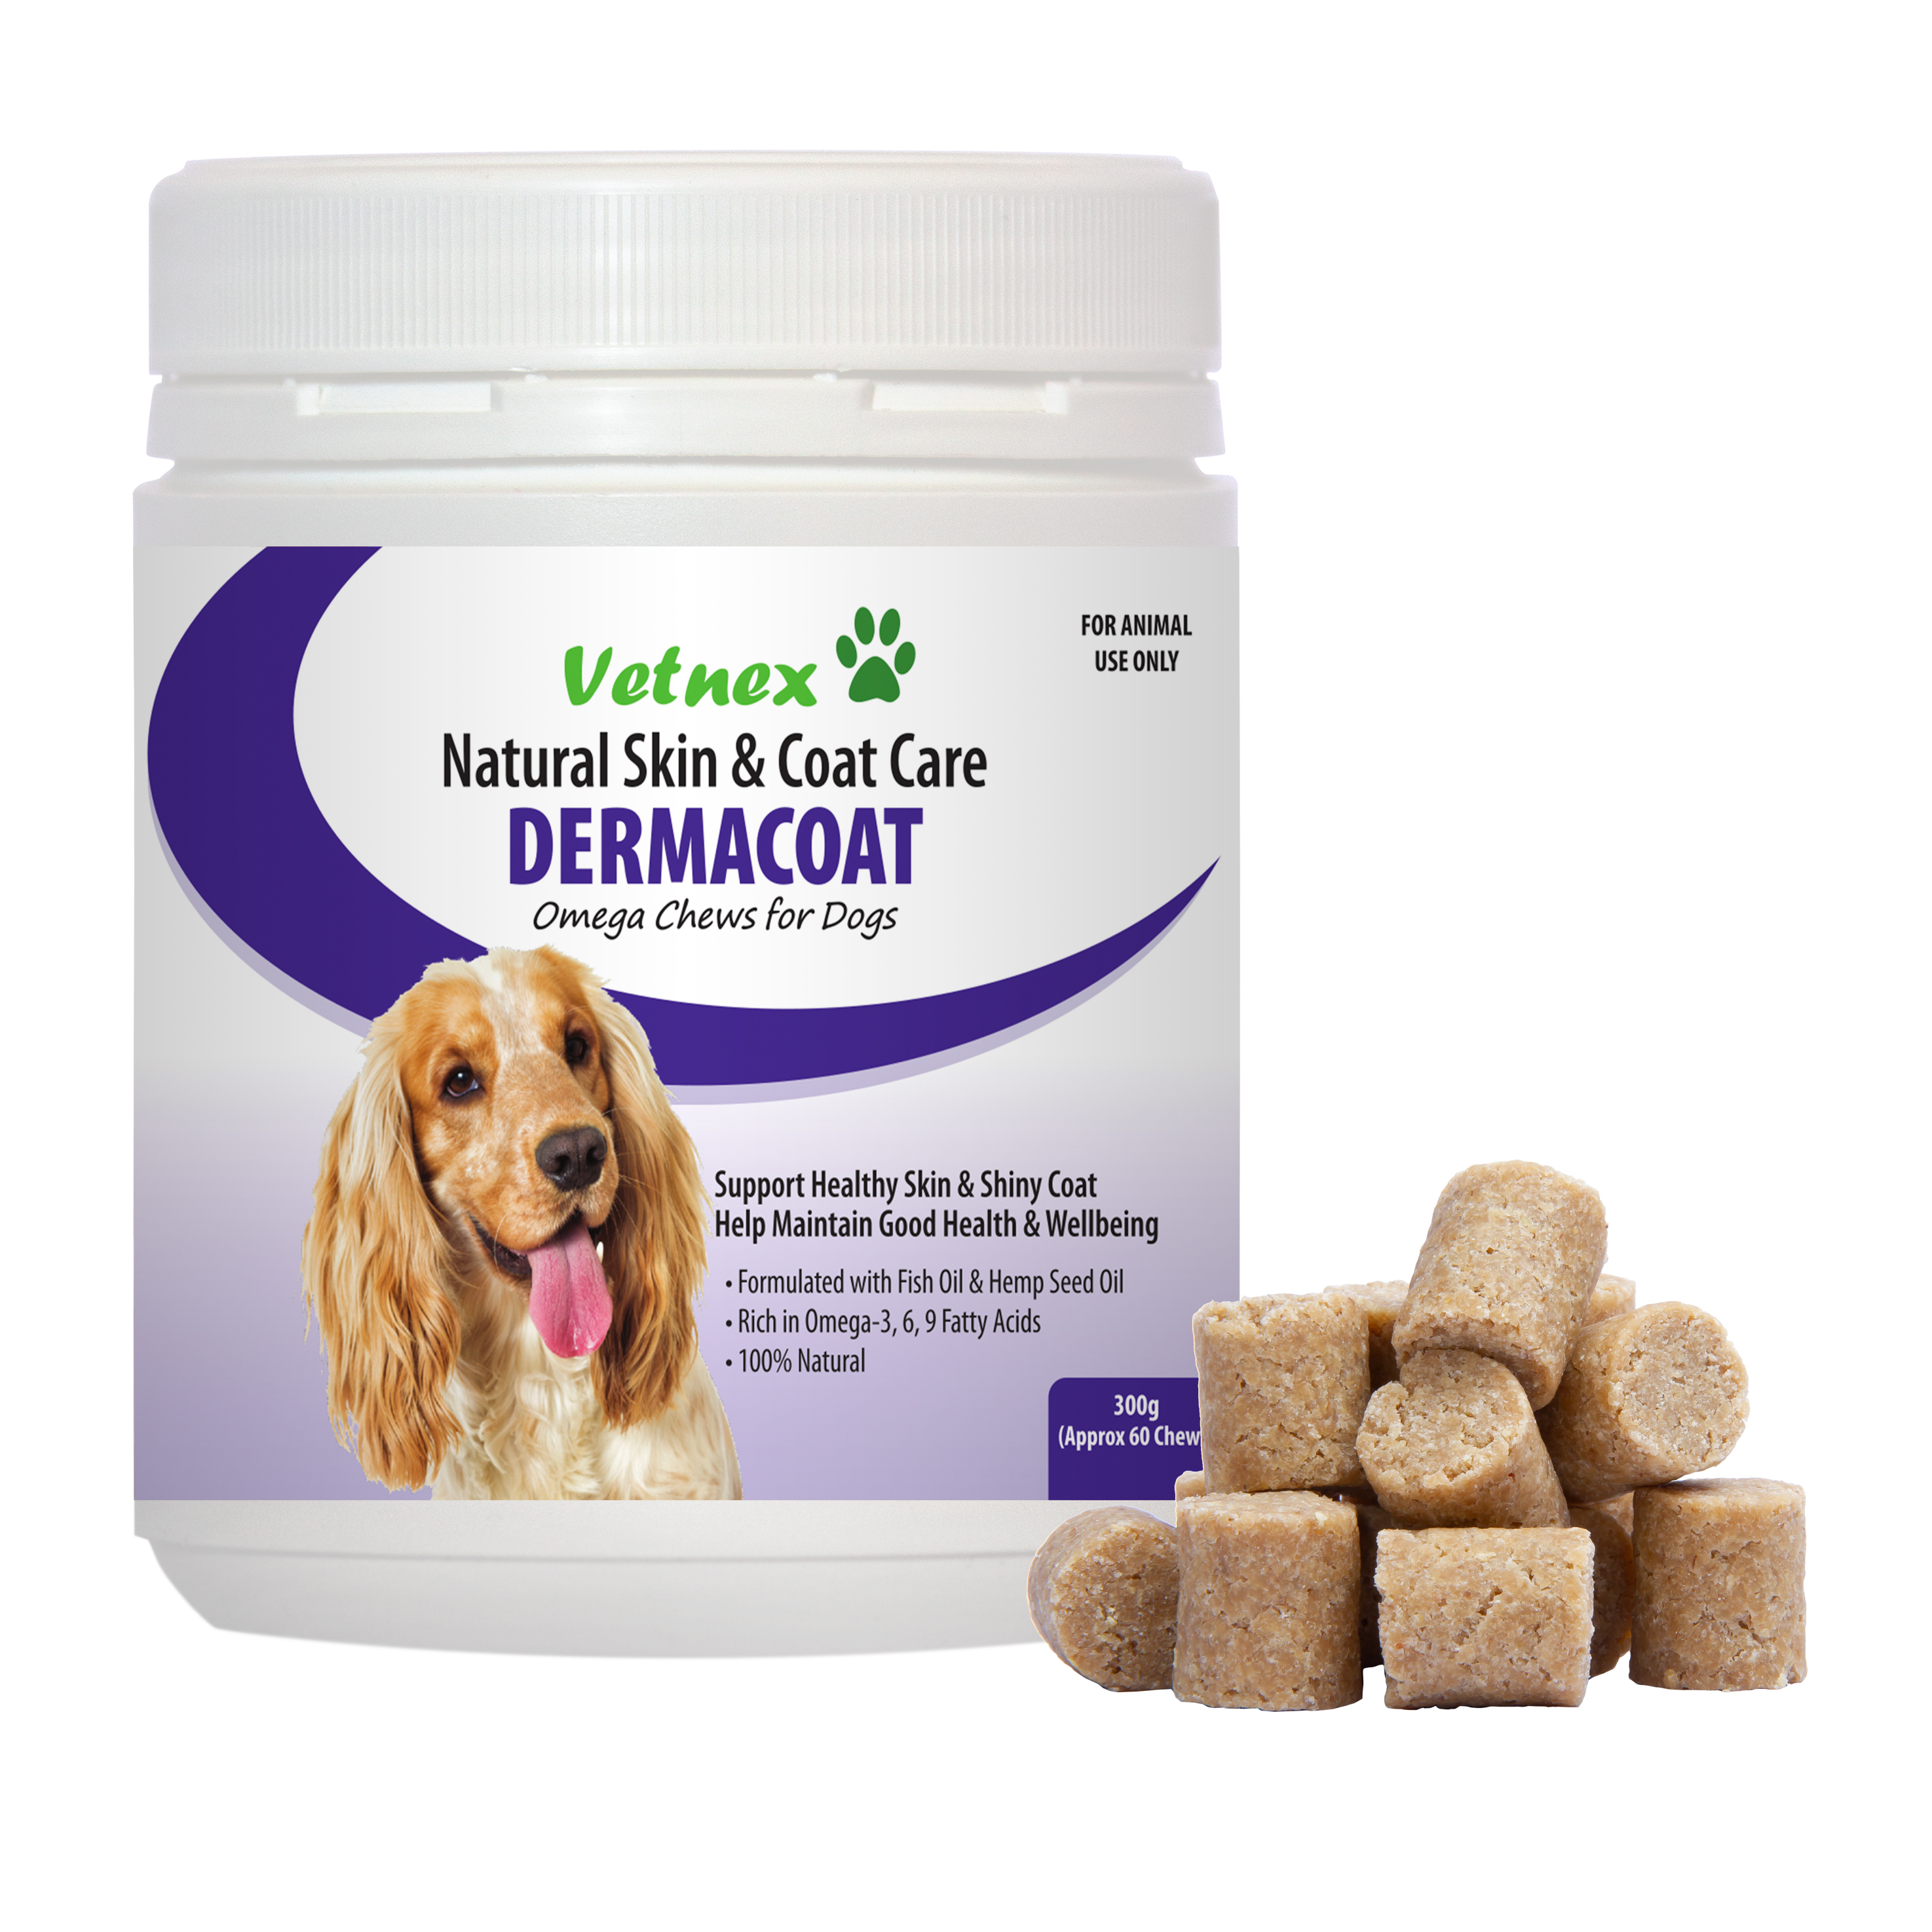 Introducing the Innovative Fish Oil & Hemp Seed Oil Soft Chew Product, DermaCoat